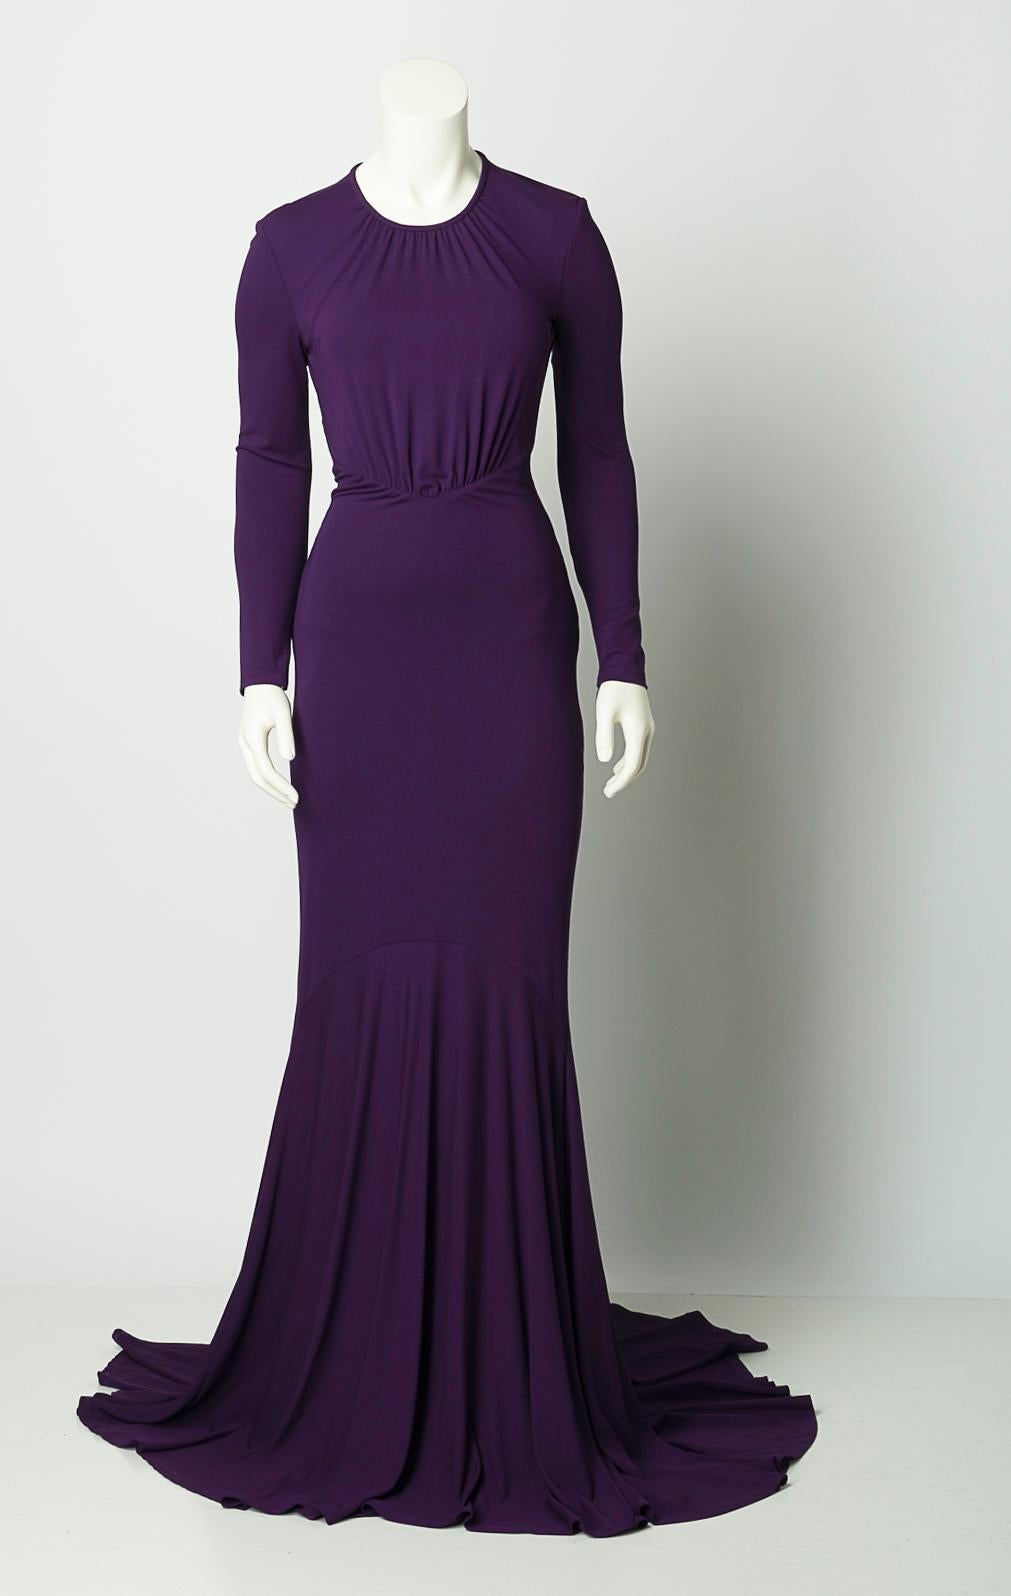 Michael Kors (mainline) purple stretch jersey fitted gown with flared hem. Slight train at back. Gathered at v-shaped waist seam. Cross-draped waist accent that probably accents front waist (we think we've photographed the dress with that part